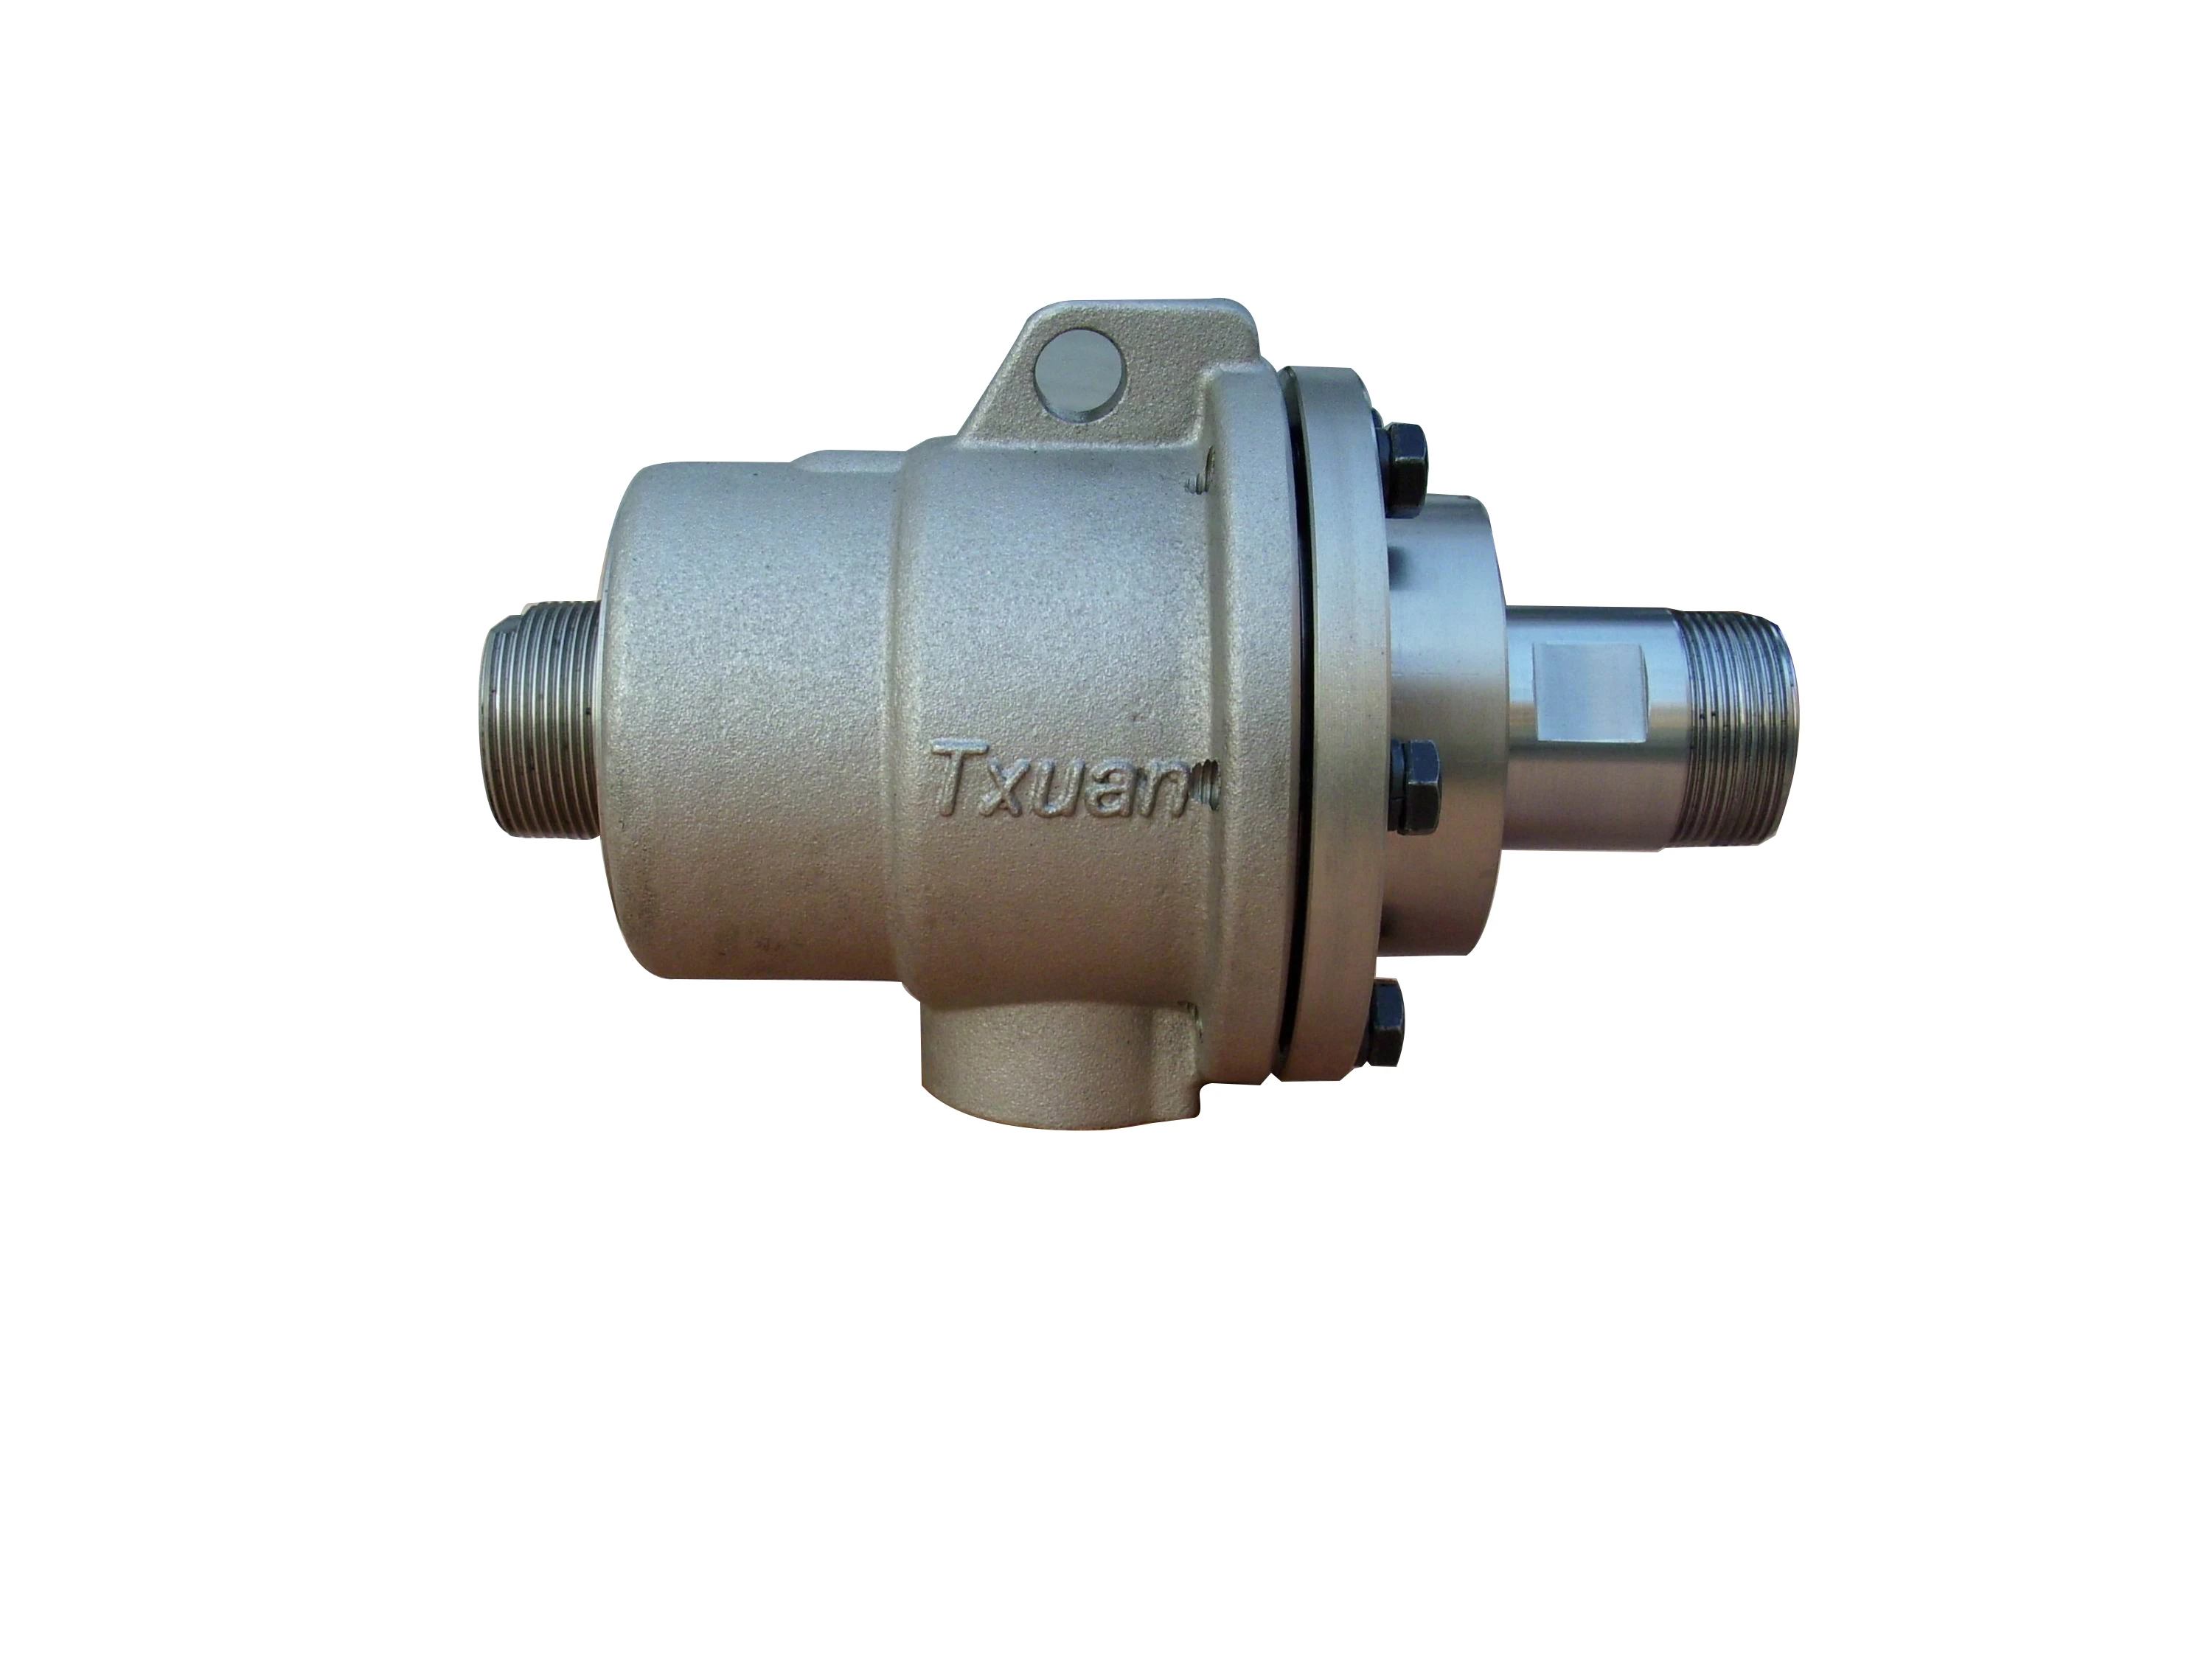 1-1/2 high temperature steam rotating joint Swivel joint